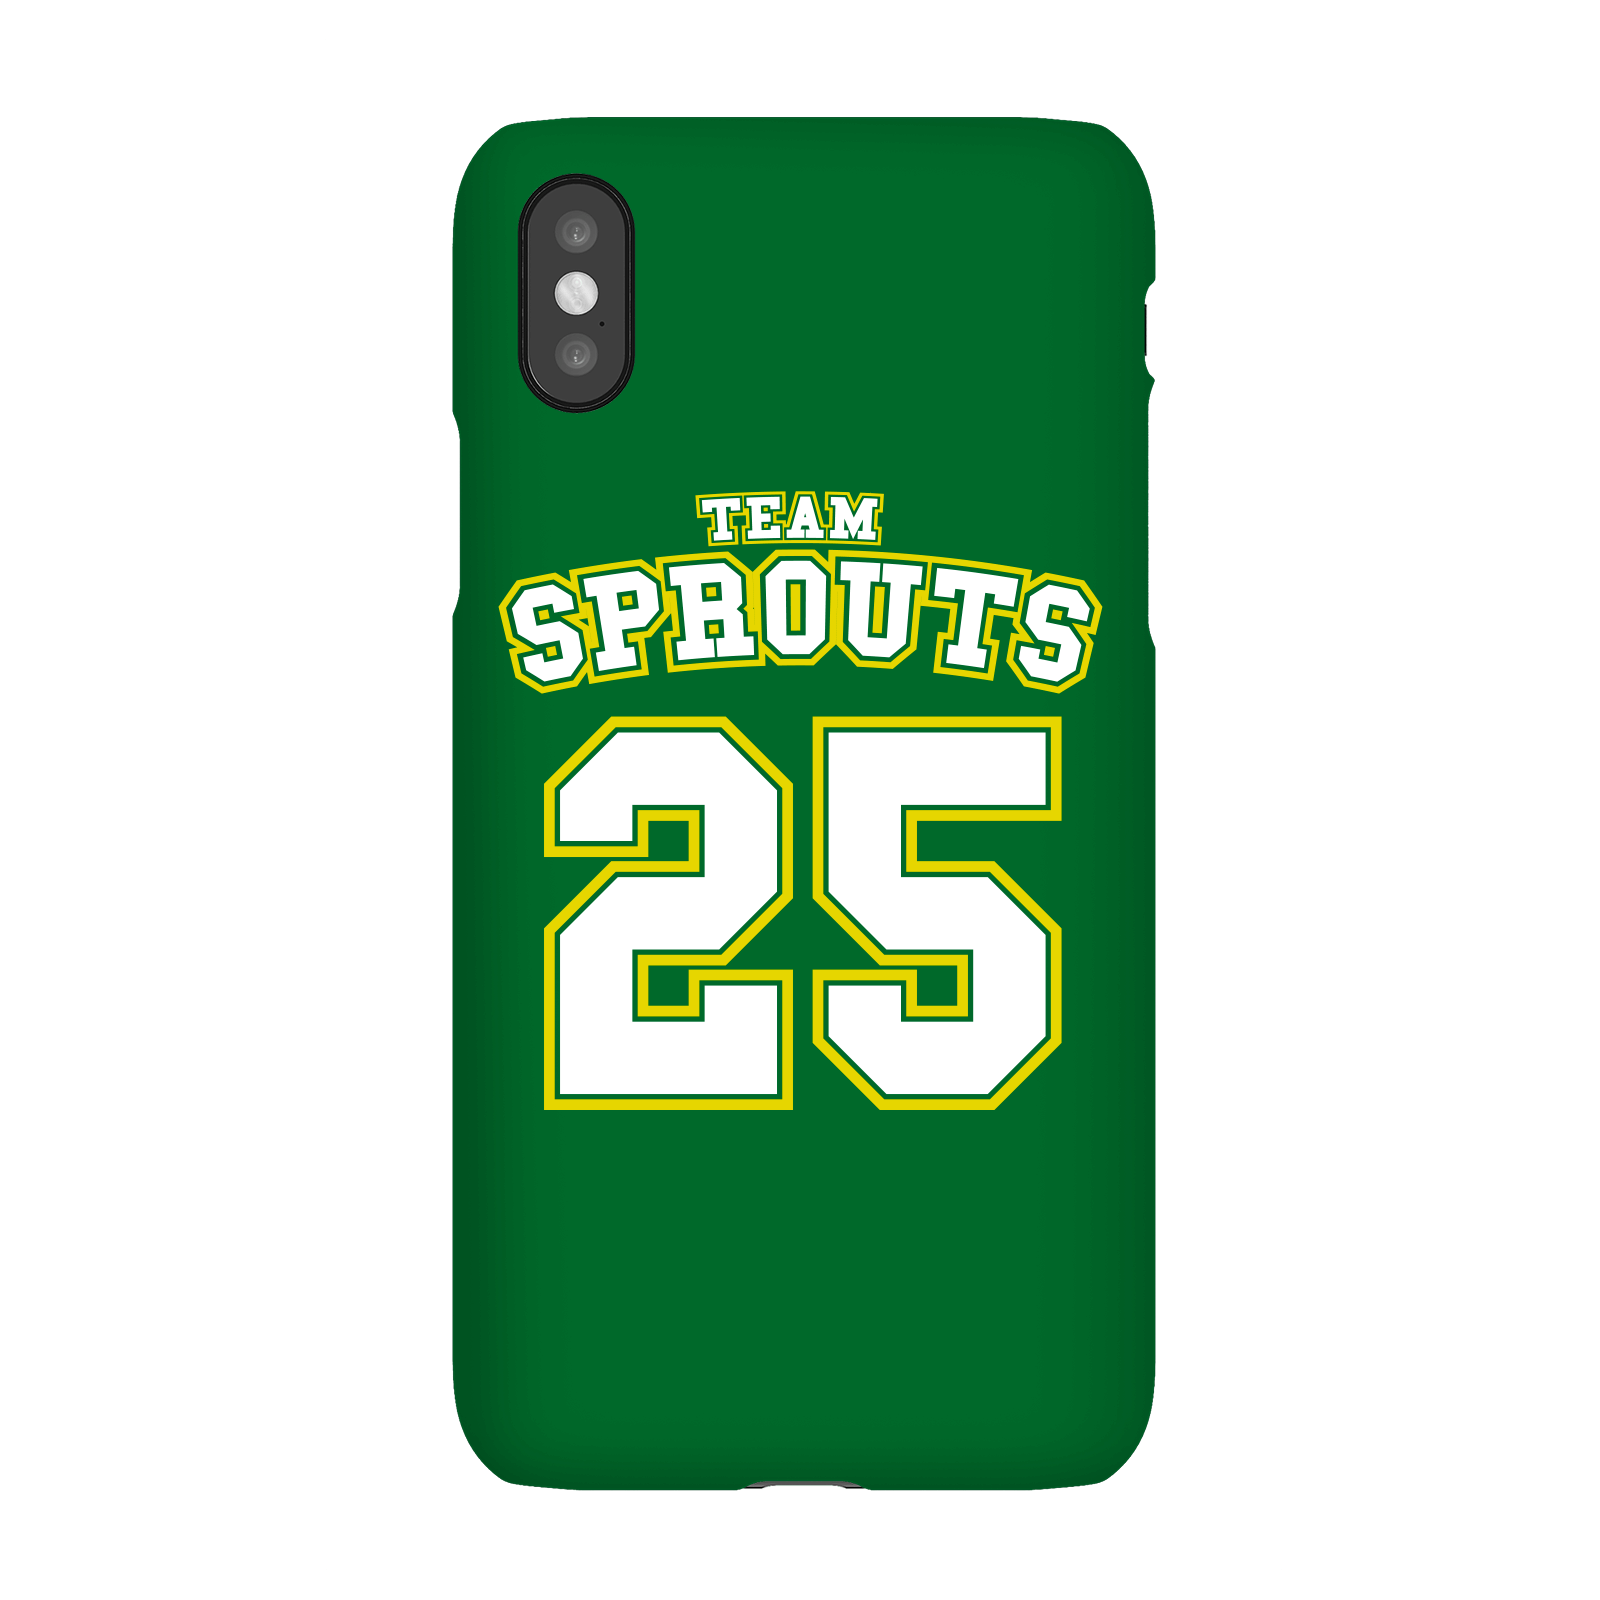 Team Sprouts Phone Case for iPhone and Android - iPhone 5/5s - Snap Case - Matte